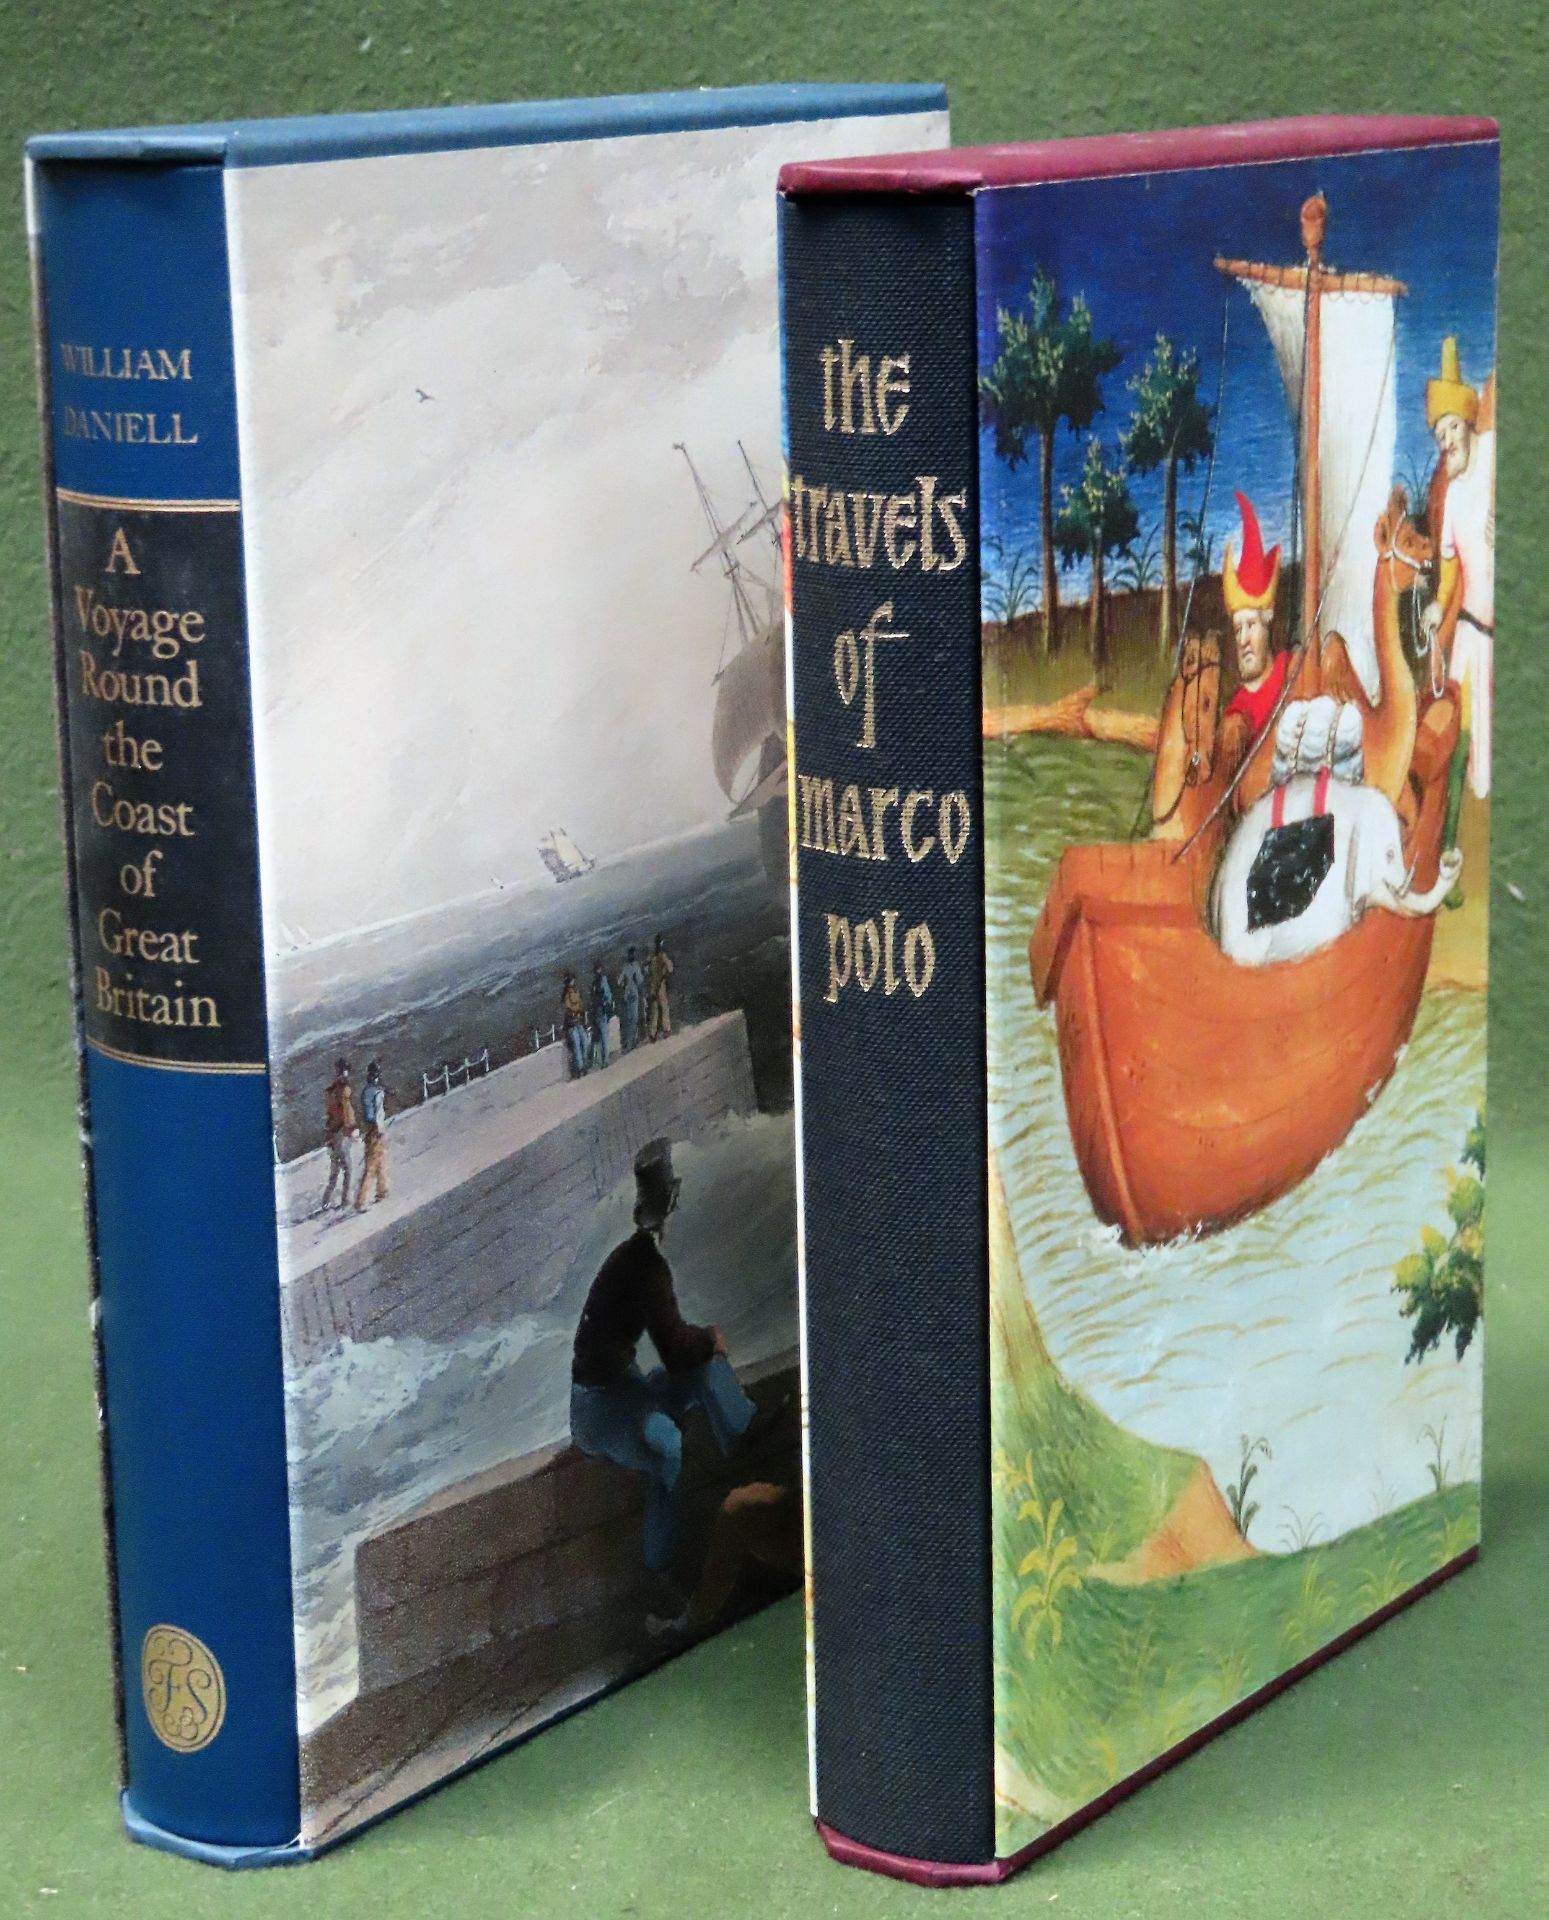 FOLIO SOCIETY TWO VOLUMES - THE TRAVLES OF MARCO POLO & A VOYAGE AROUND THE COAST OF GREAT BRITAIN